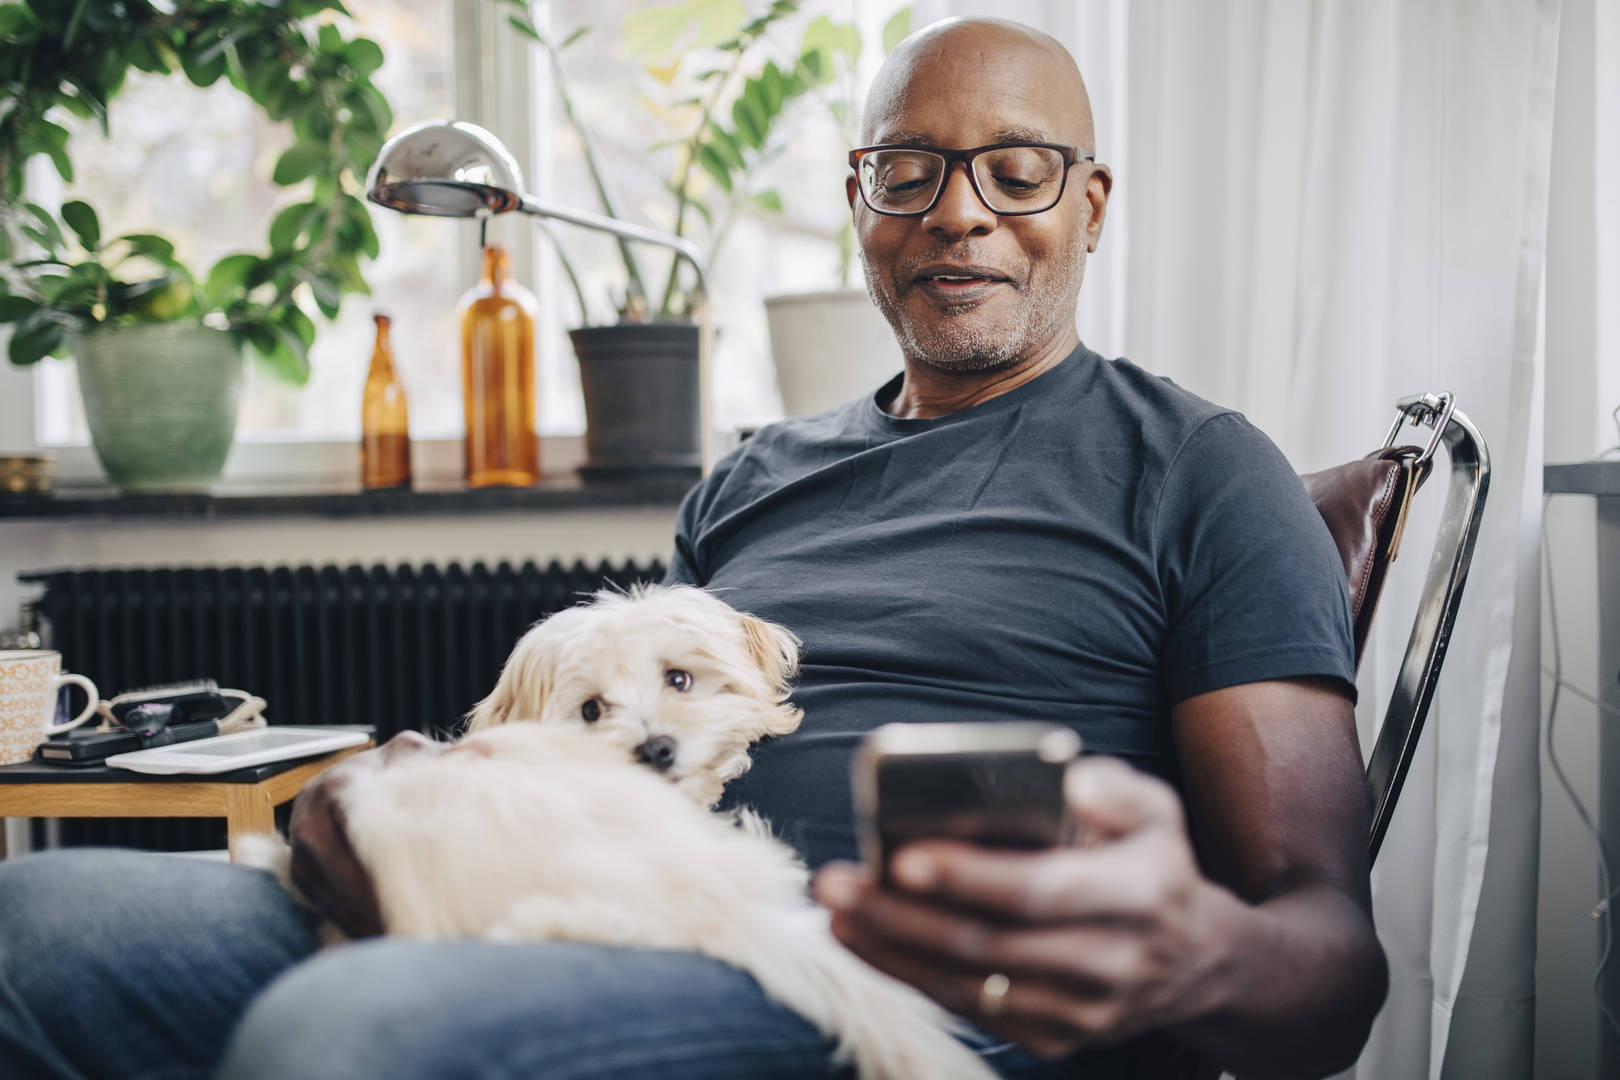 Middle-aged Black man looks at smartphone with dog on his lap